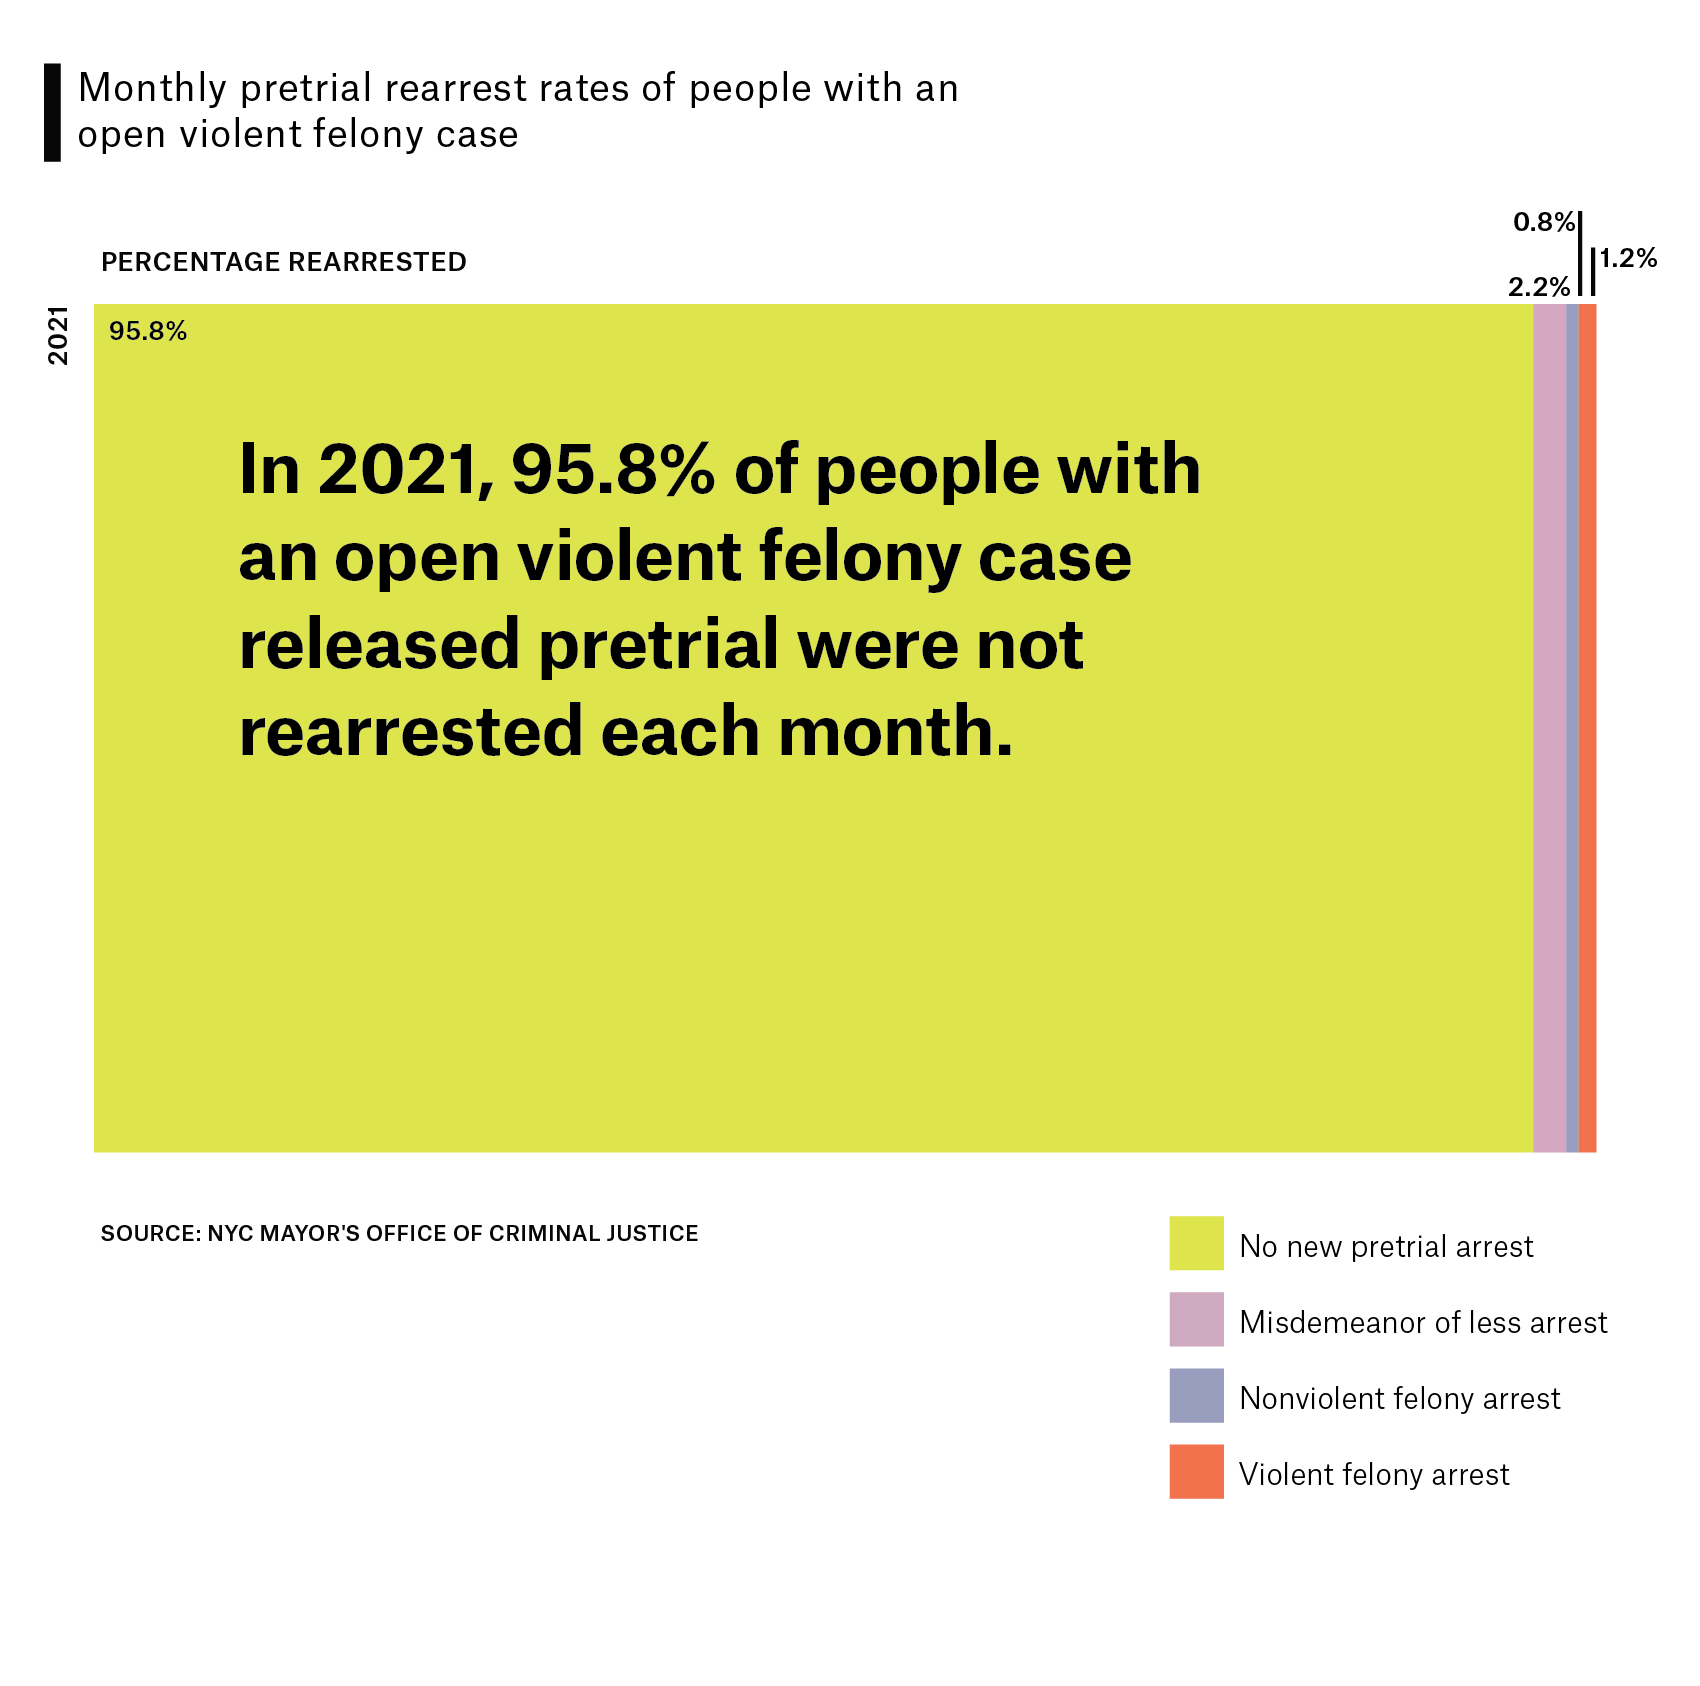 Data visualization compares monthly pretrial arrest rates of people with an open felony case. Large, bold text on image reads, "In 2021, 95.8% of people with an open violent felony case released pretrial were not rearrested each month."